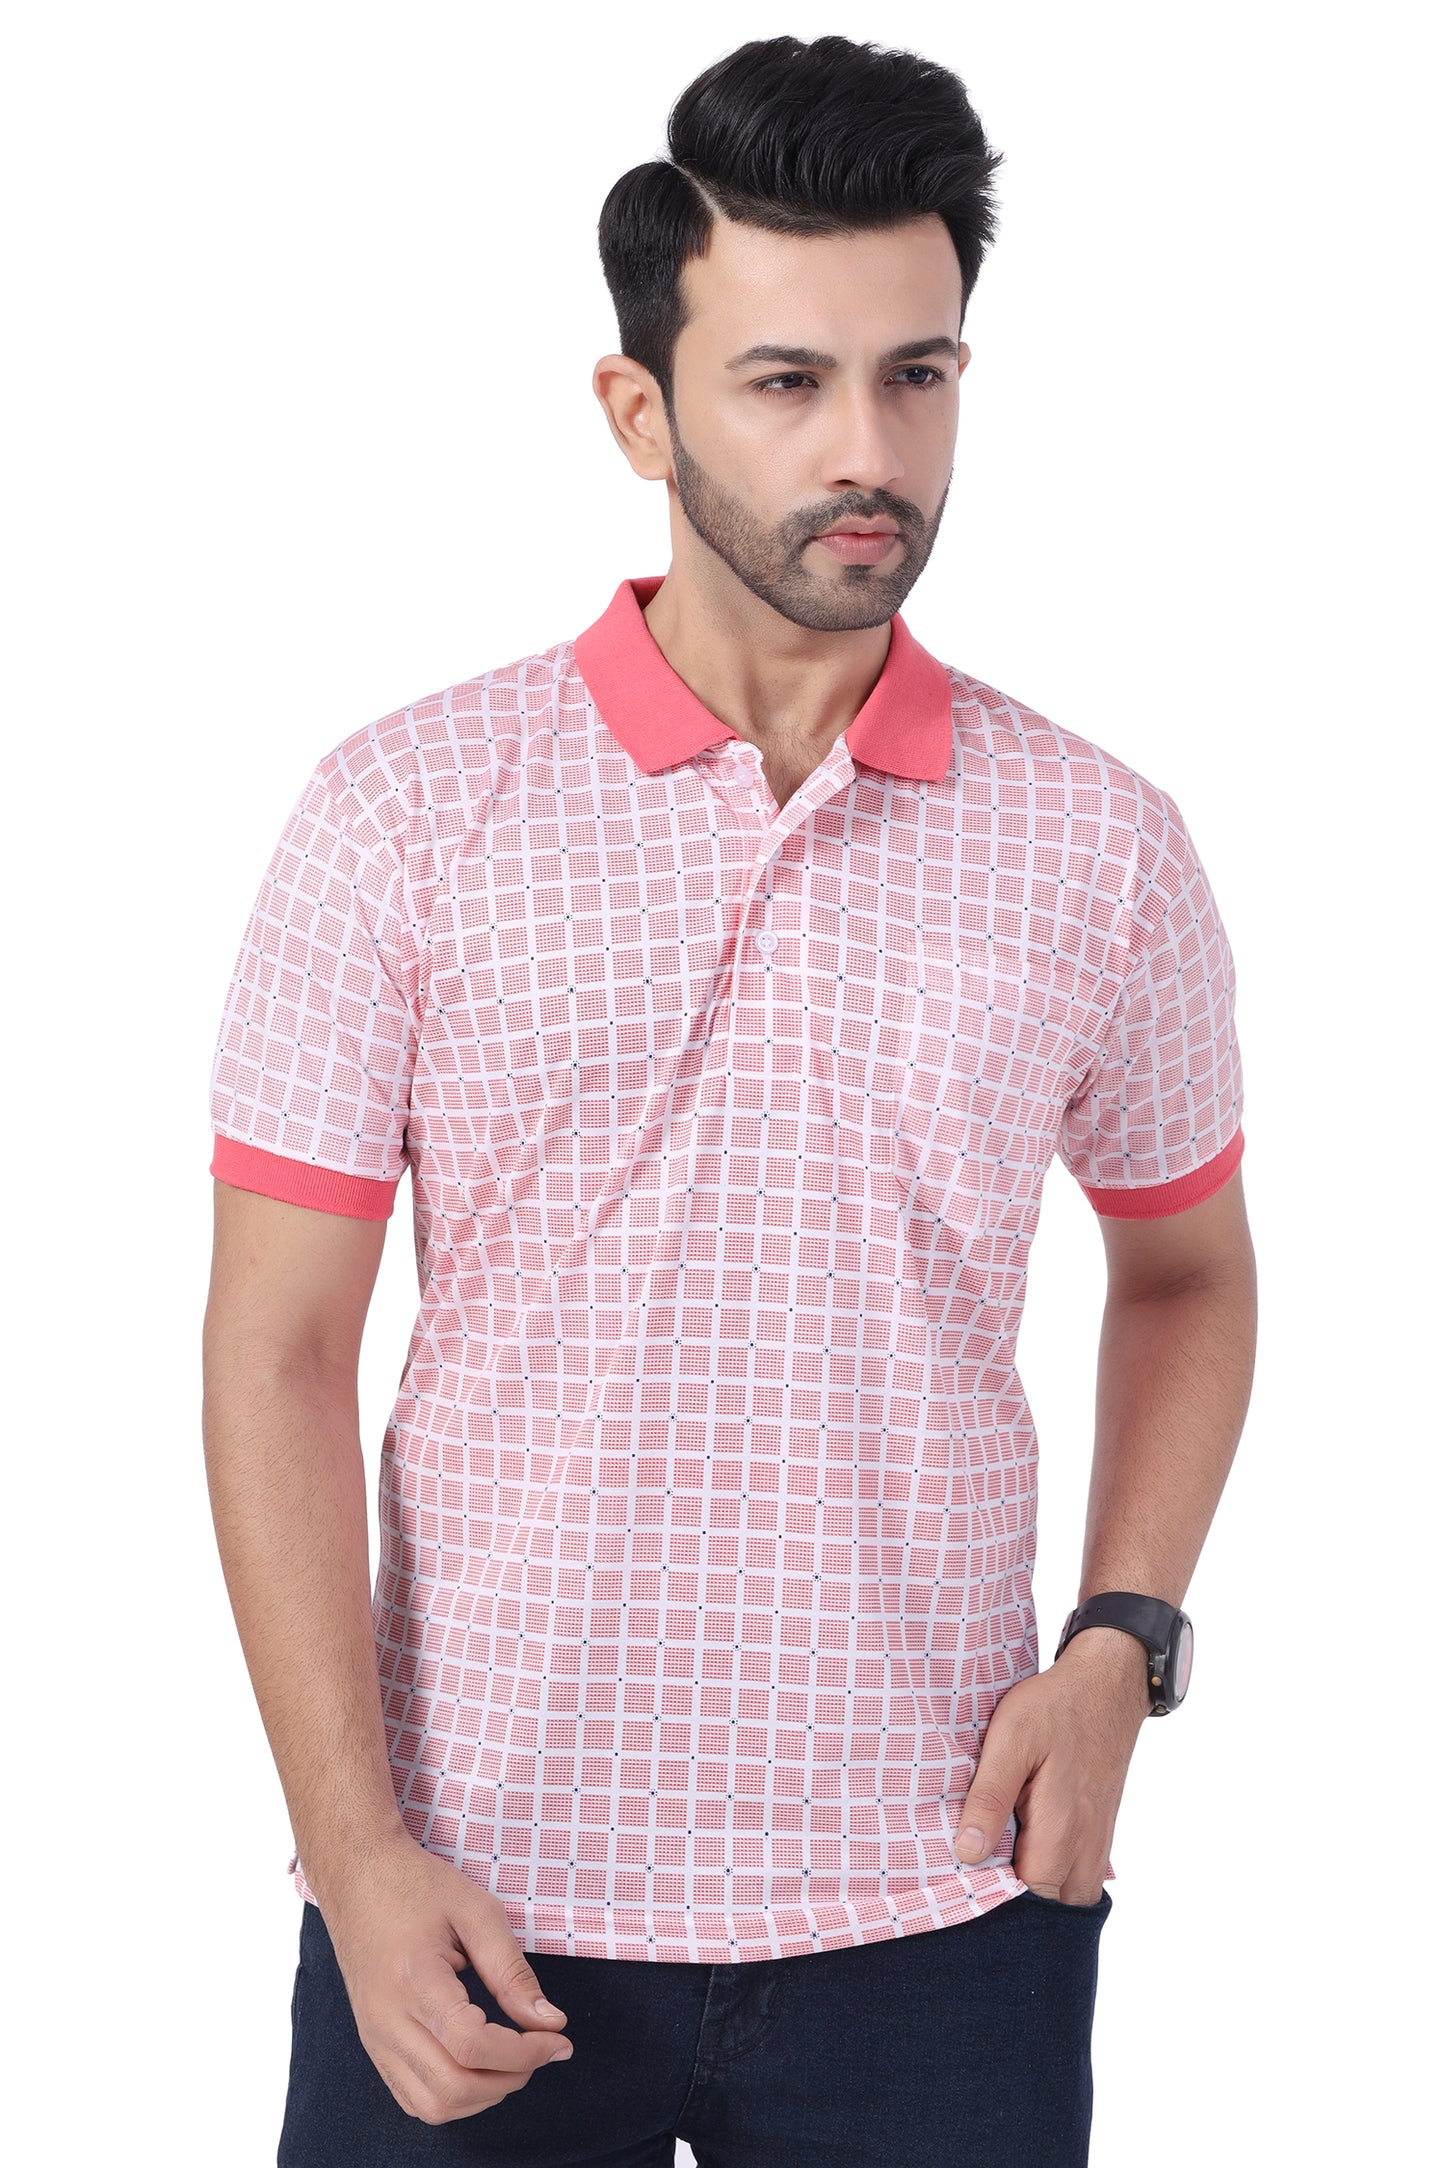 Men's Cotton Polo Neck Half Sleeve All Overl Print T-Shirt with Collar | SIZES FROM XS TO 2XL